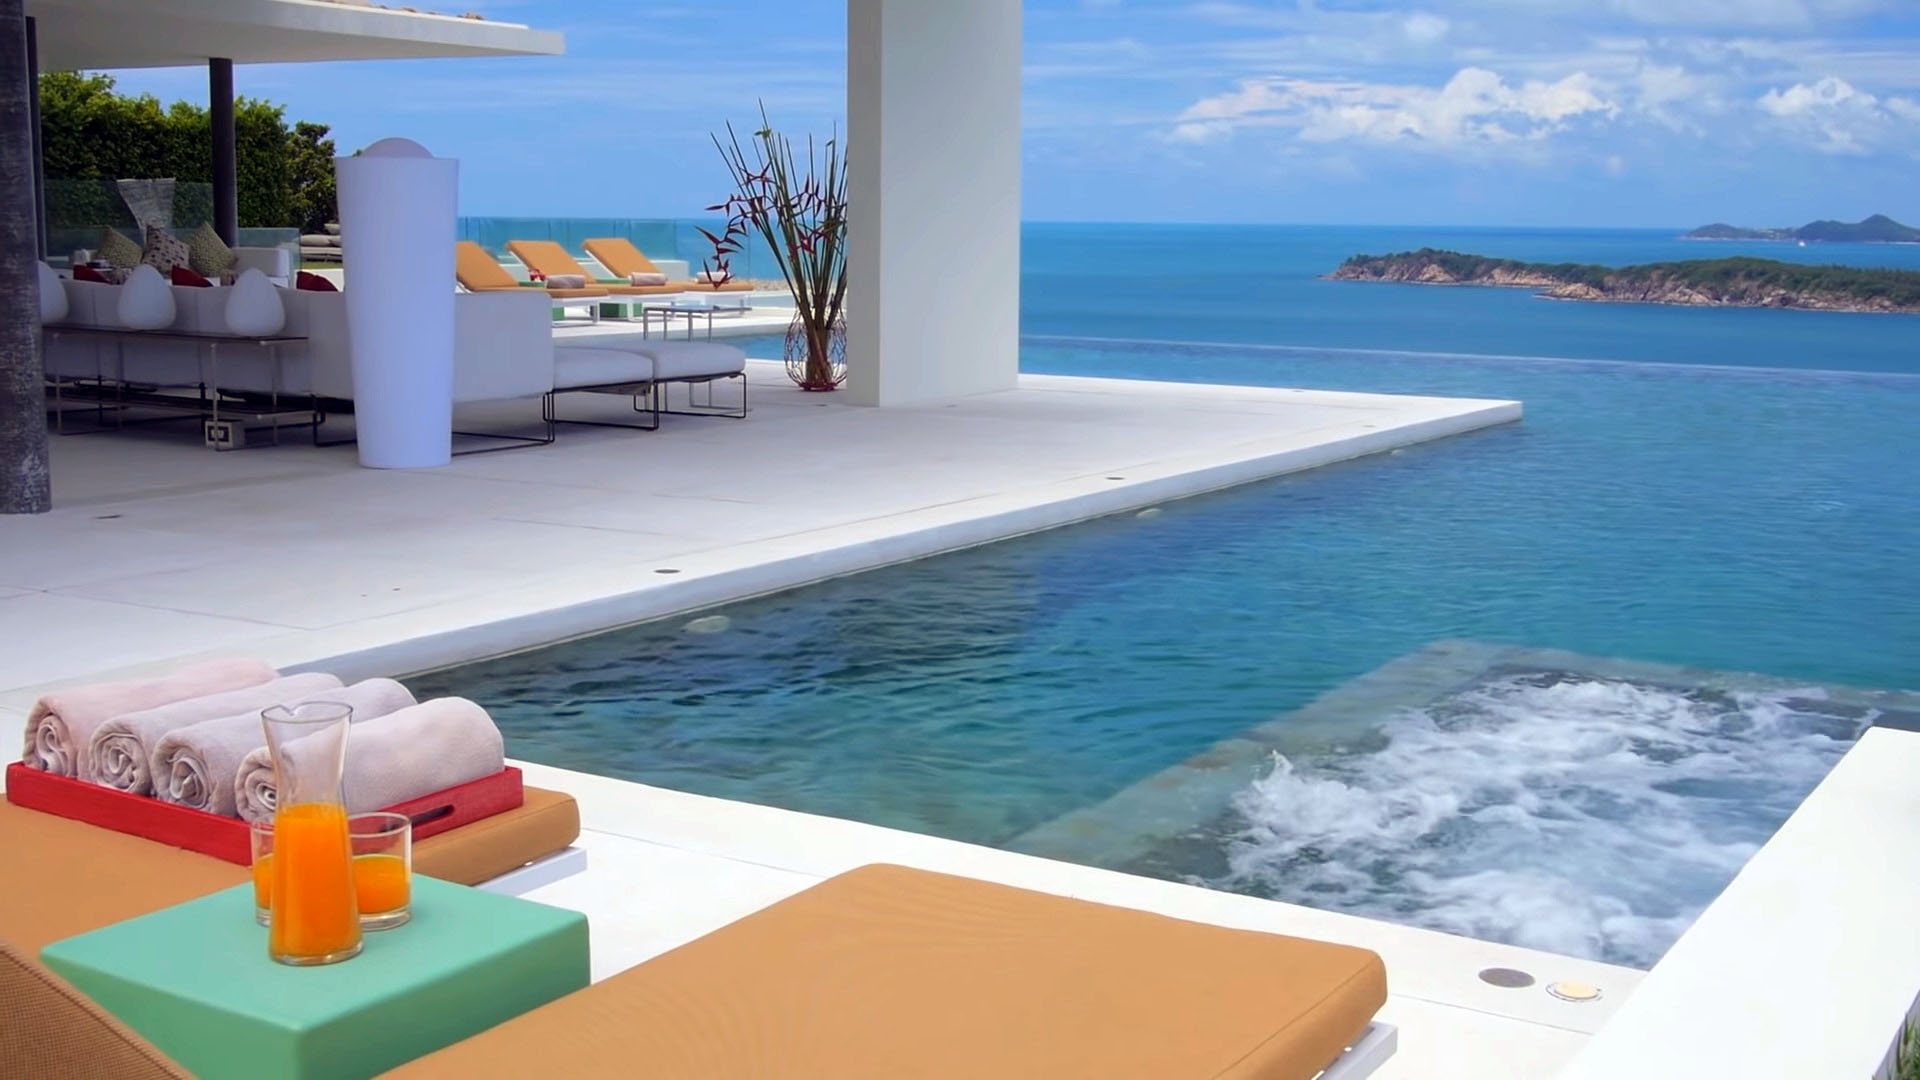 Spectacular view from this modern homes infinity edge pool.